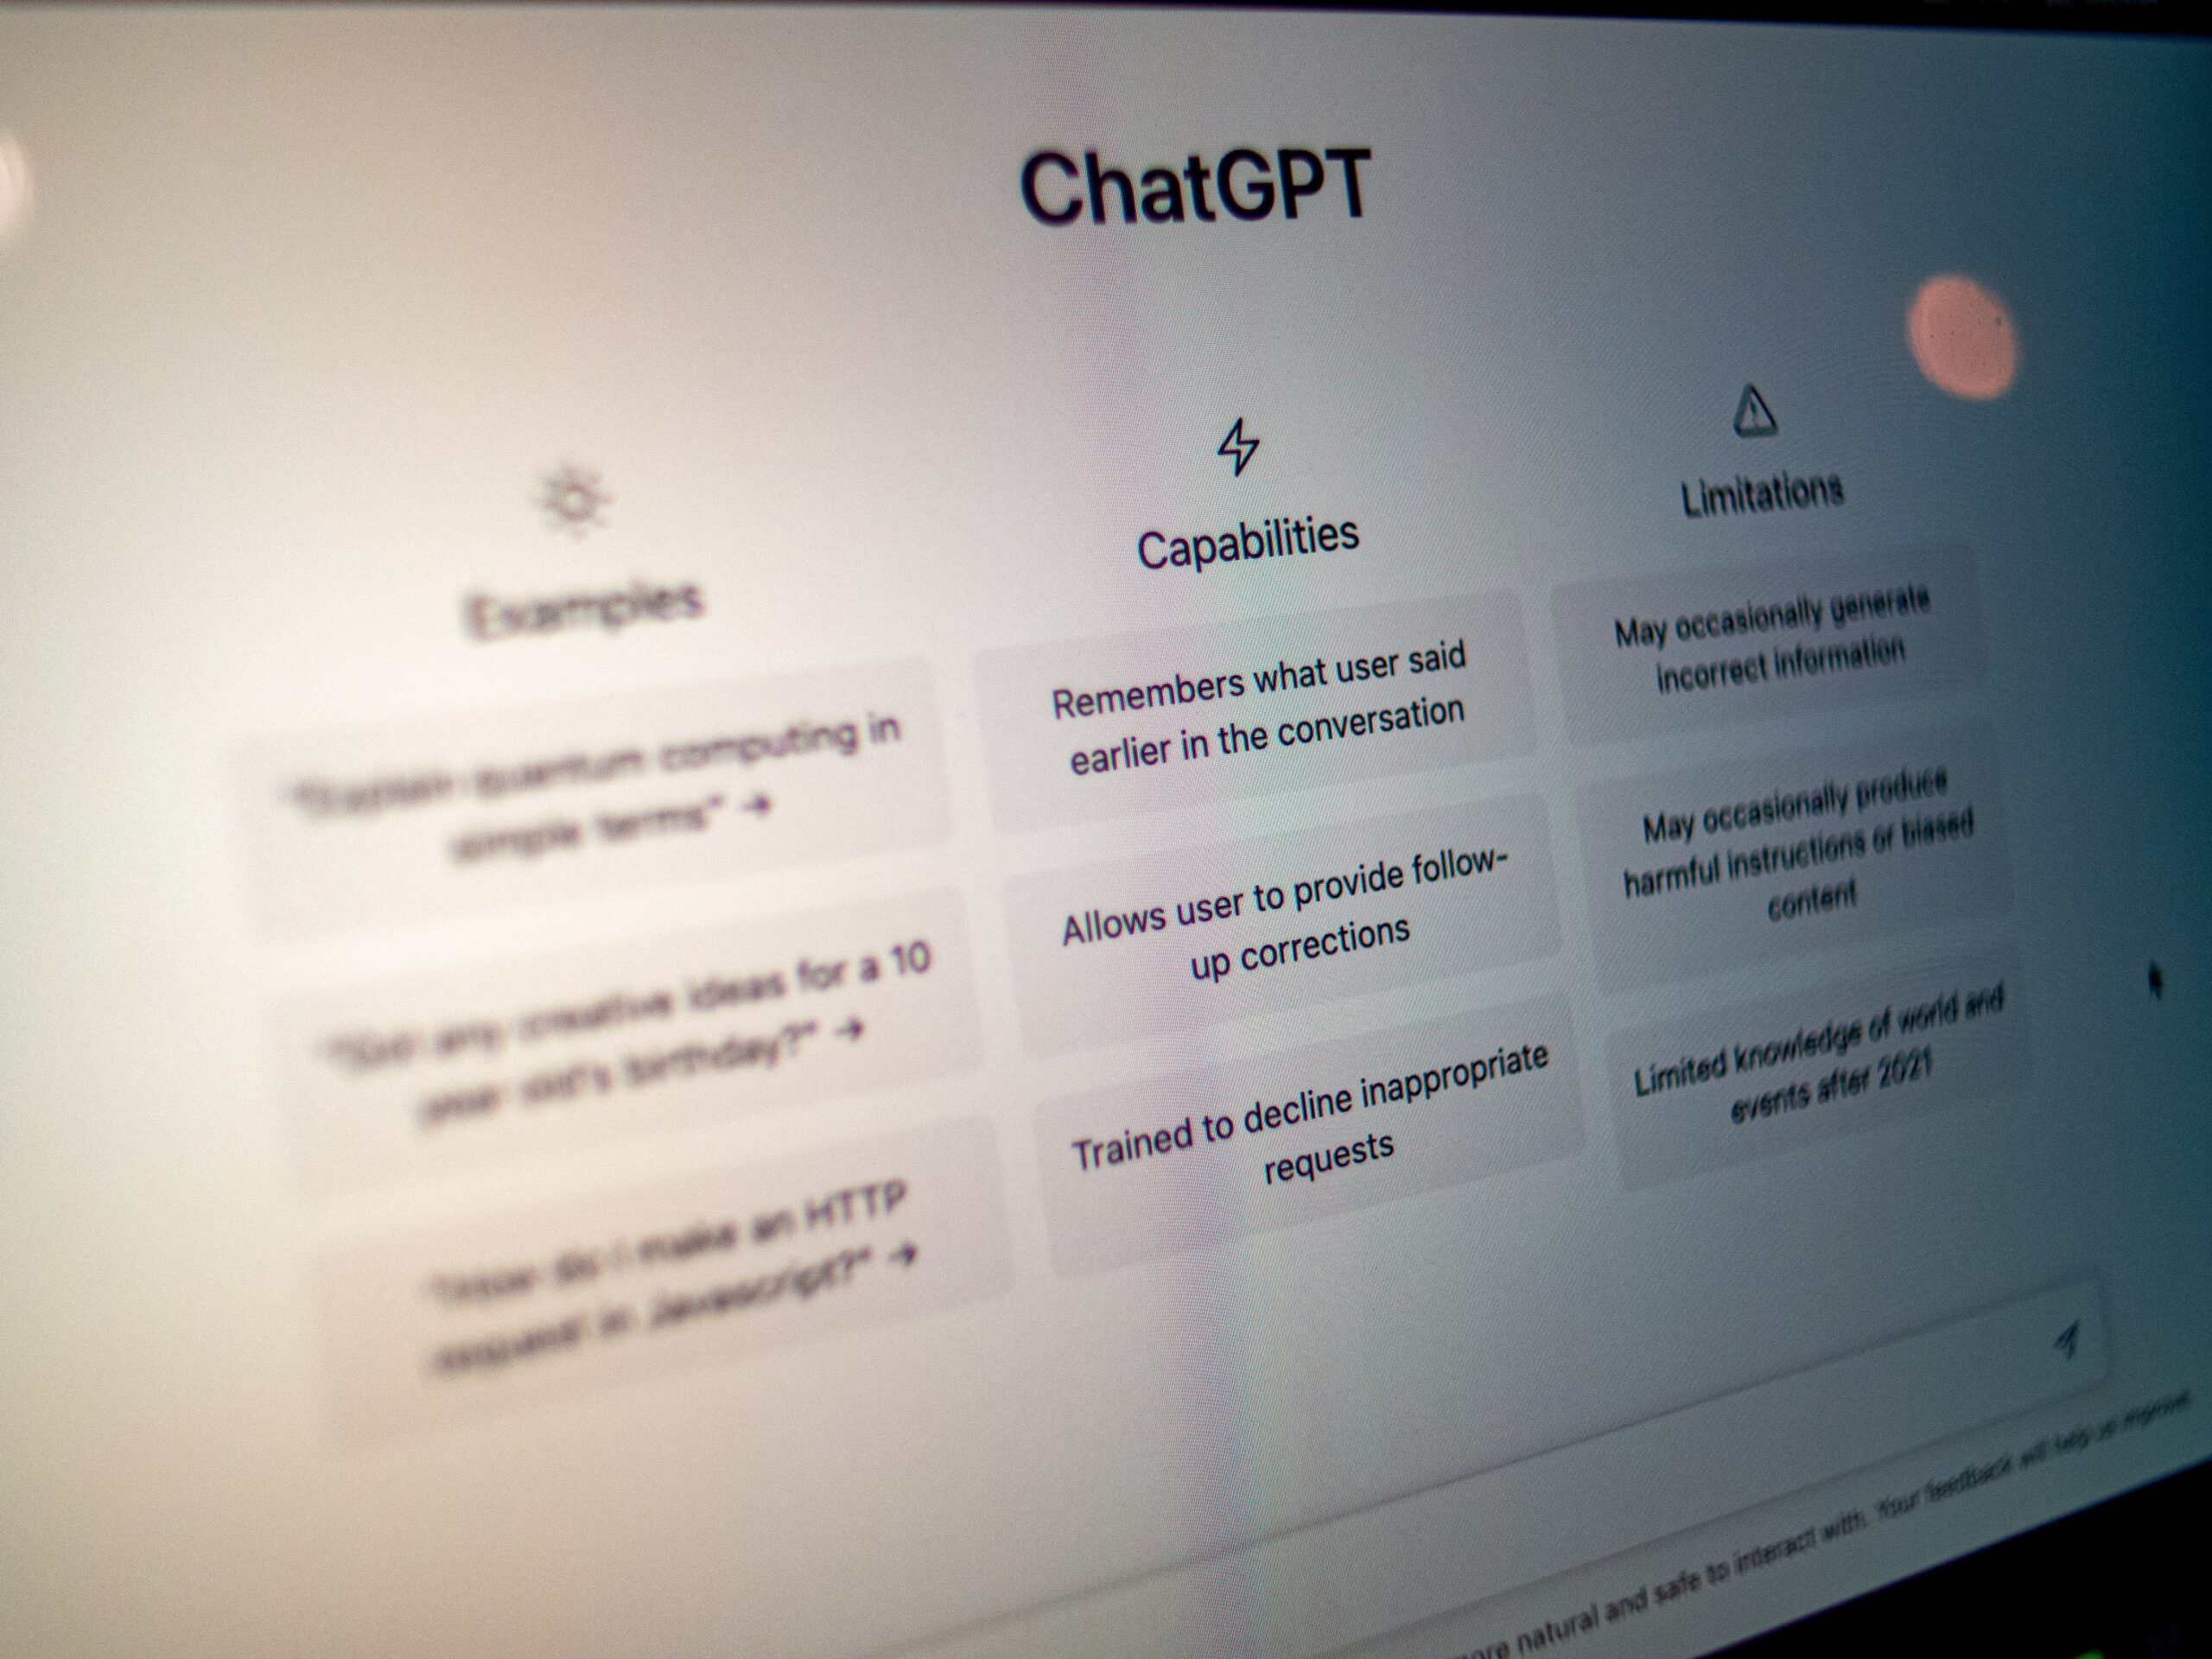 ChatGPT speech has emerged as a versatile communication tool that offers not only speech capabilities but also access to the internet, making it an invaluable resource for a wide range of applications.